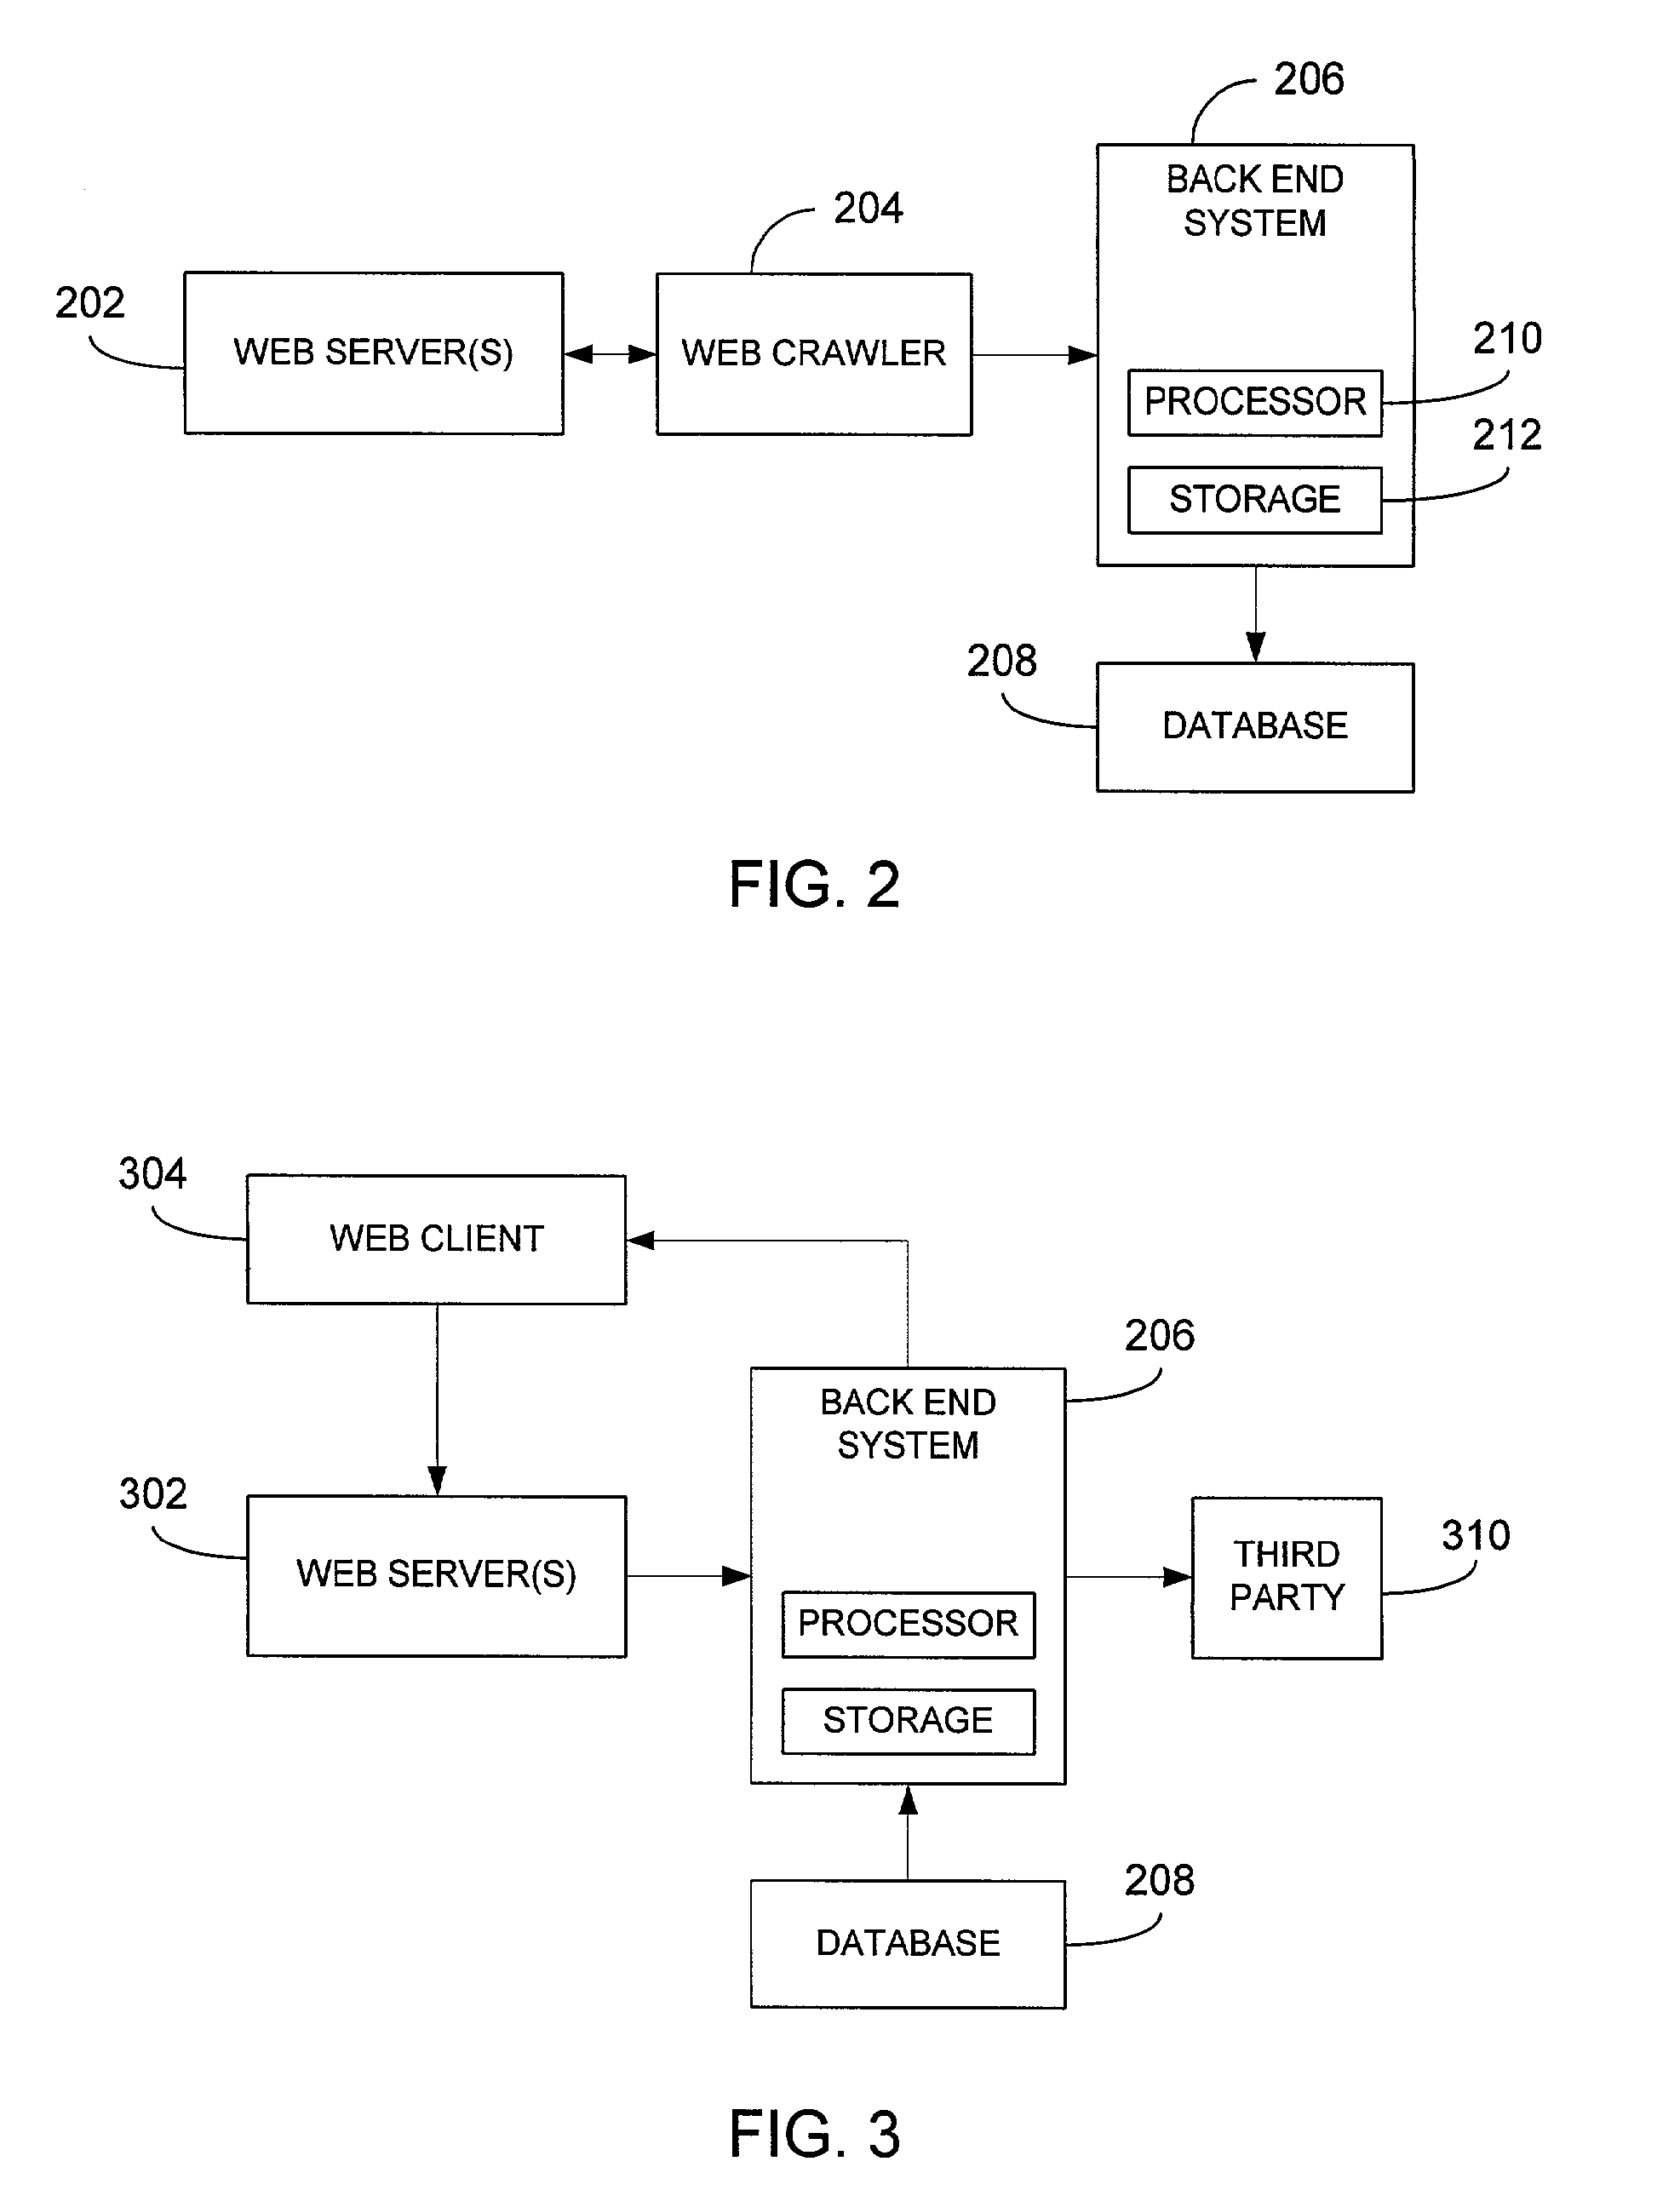 Determination of a profile of an entity based on product descriptions